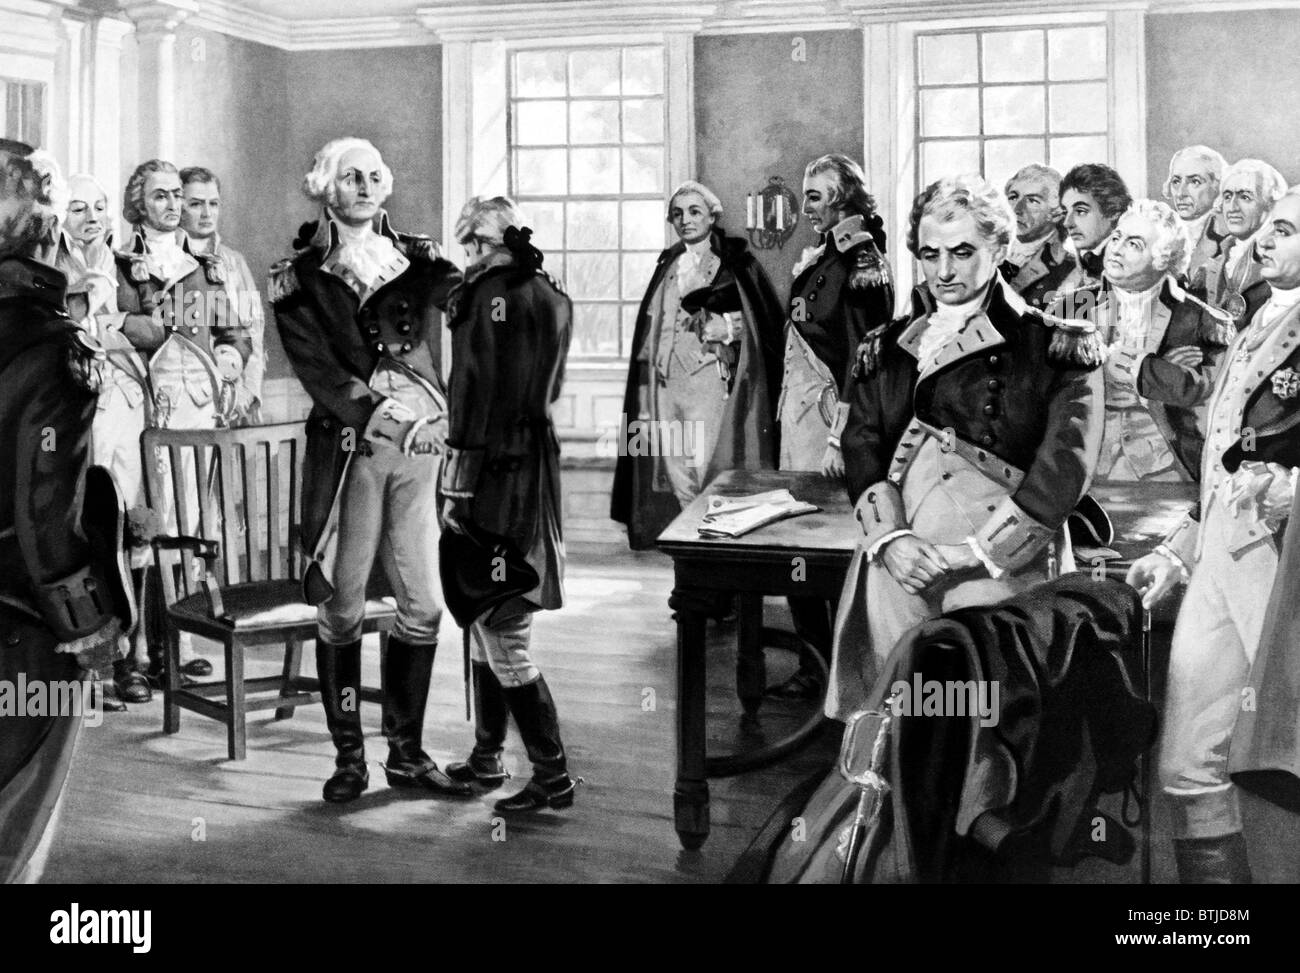 George Washington says farewell to his troops at Fraunces Tavern, New York, 1783. Painting by Hintermeister. Courtesy: CSU Archi Stock Photo